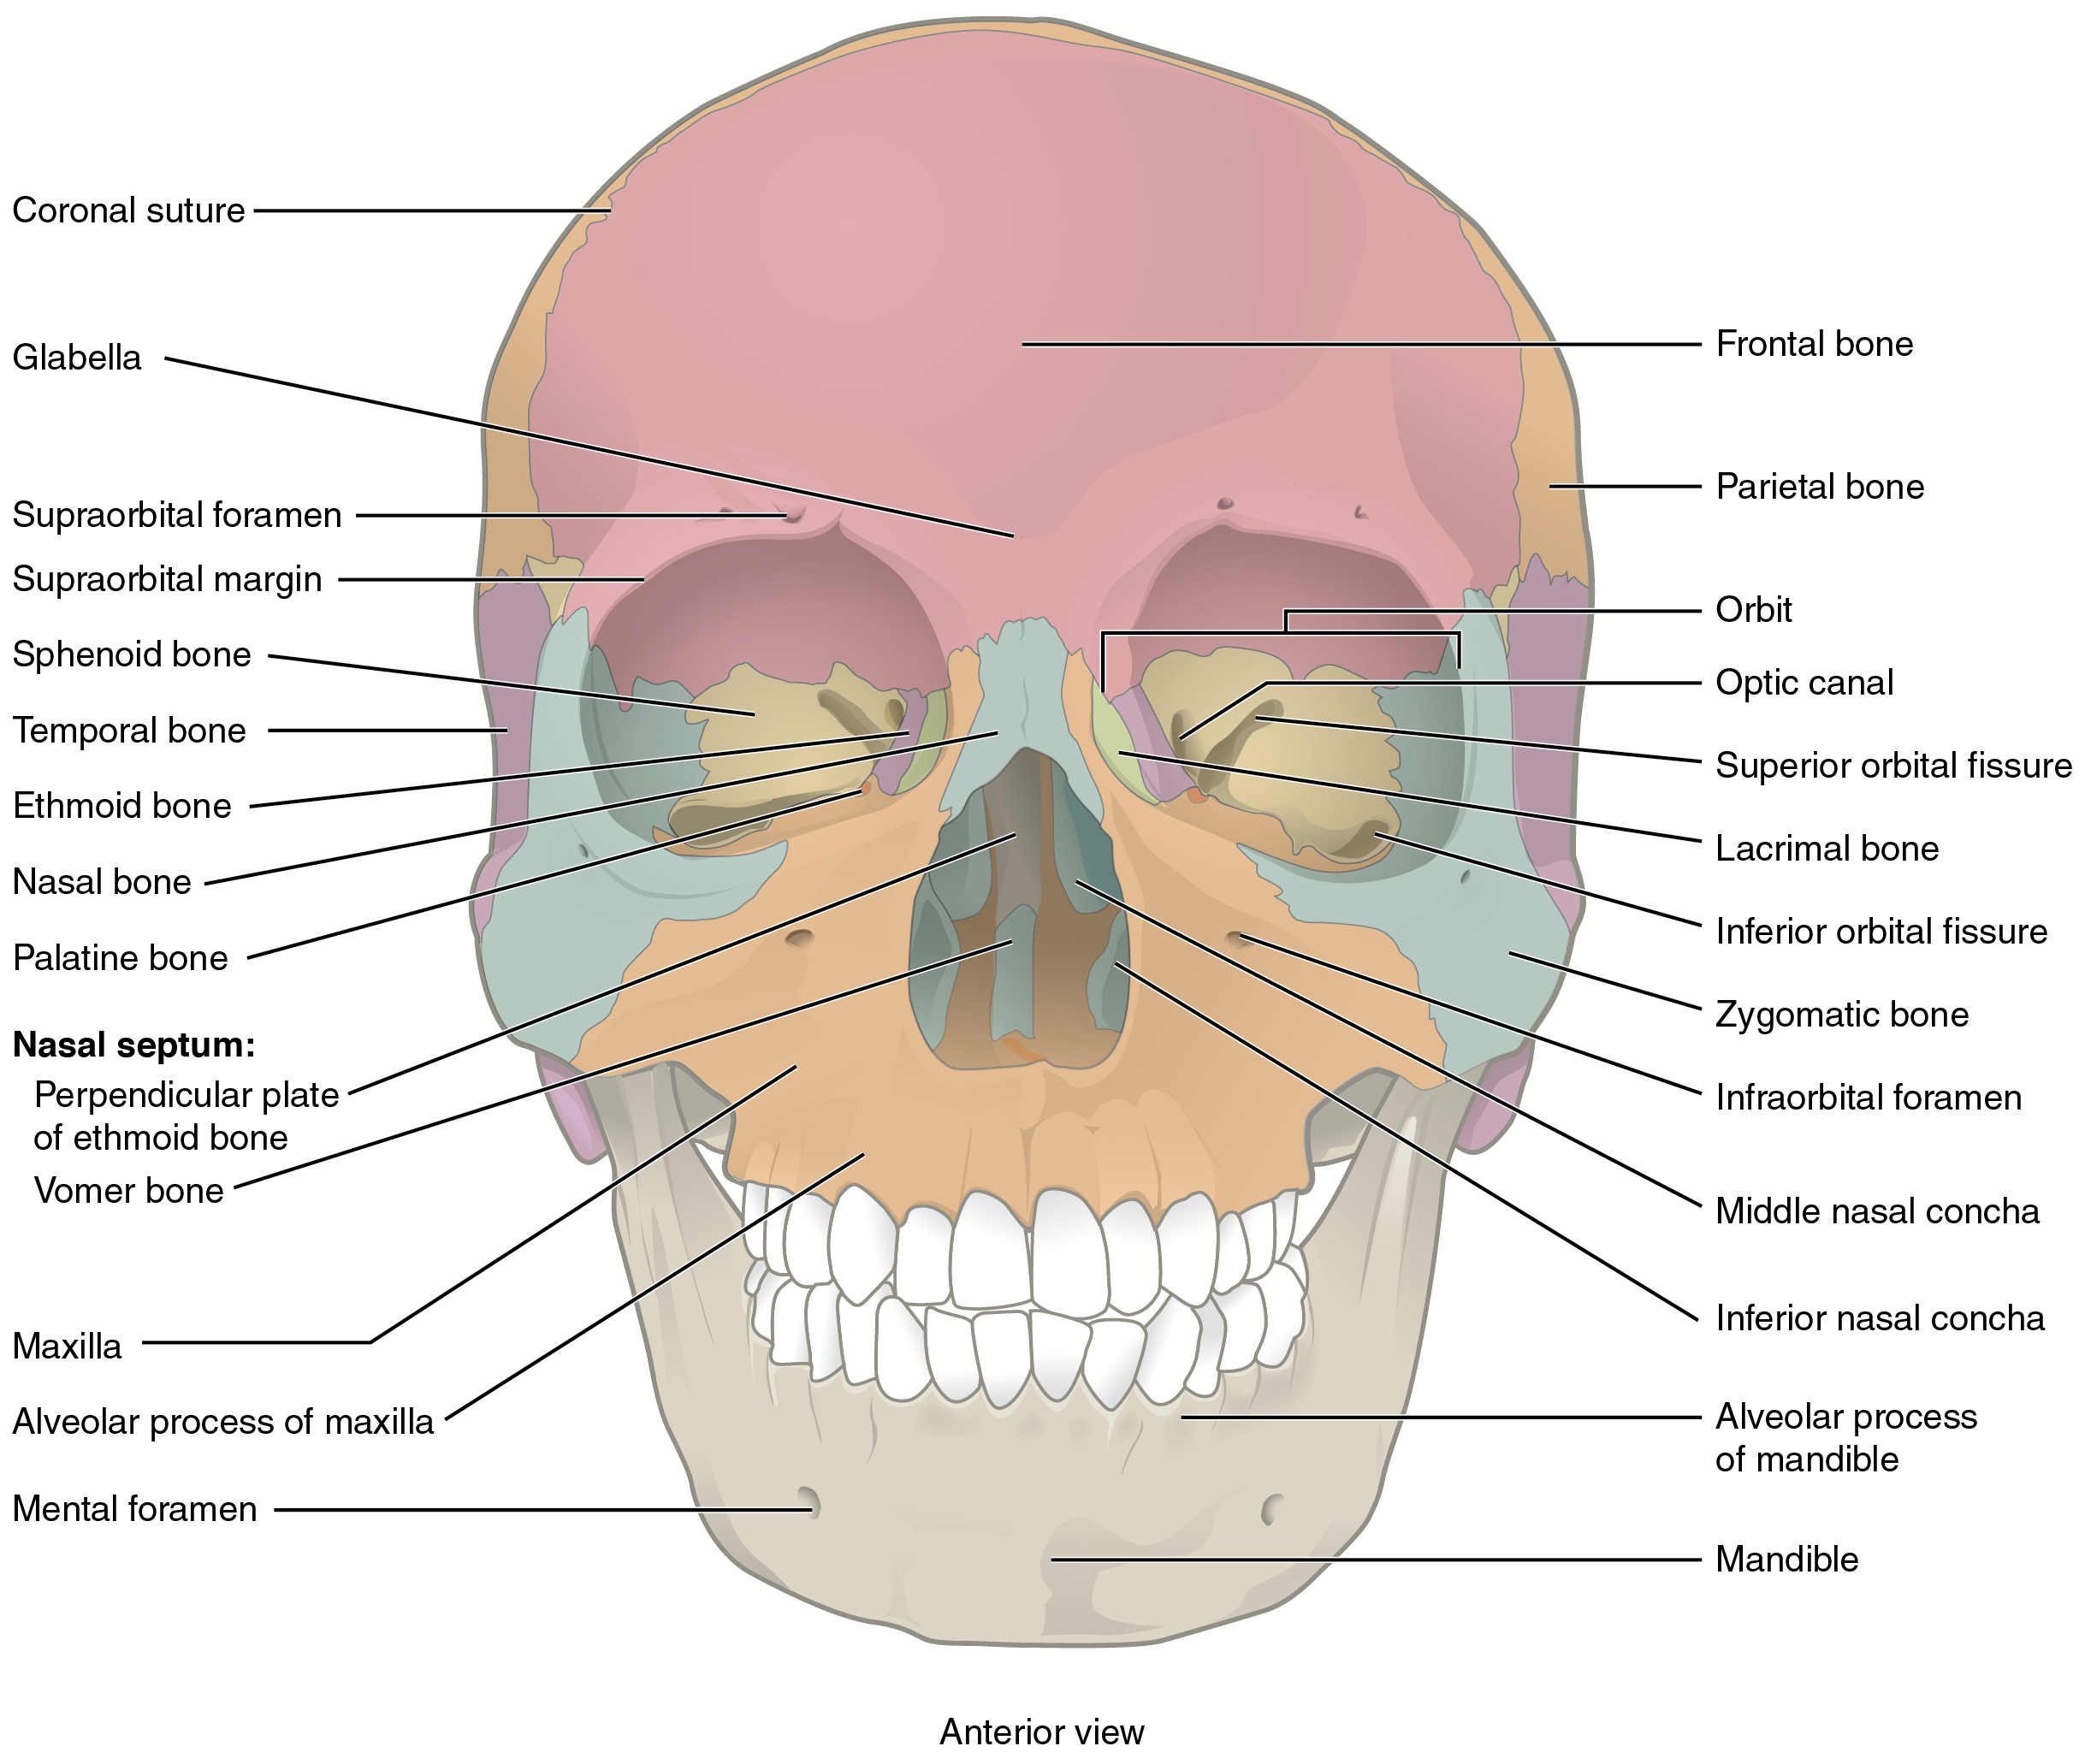 This image shows the anterior view (from the front) of the human skull